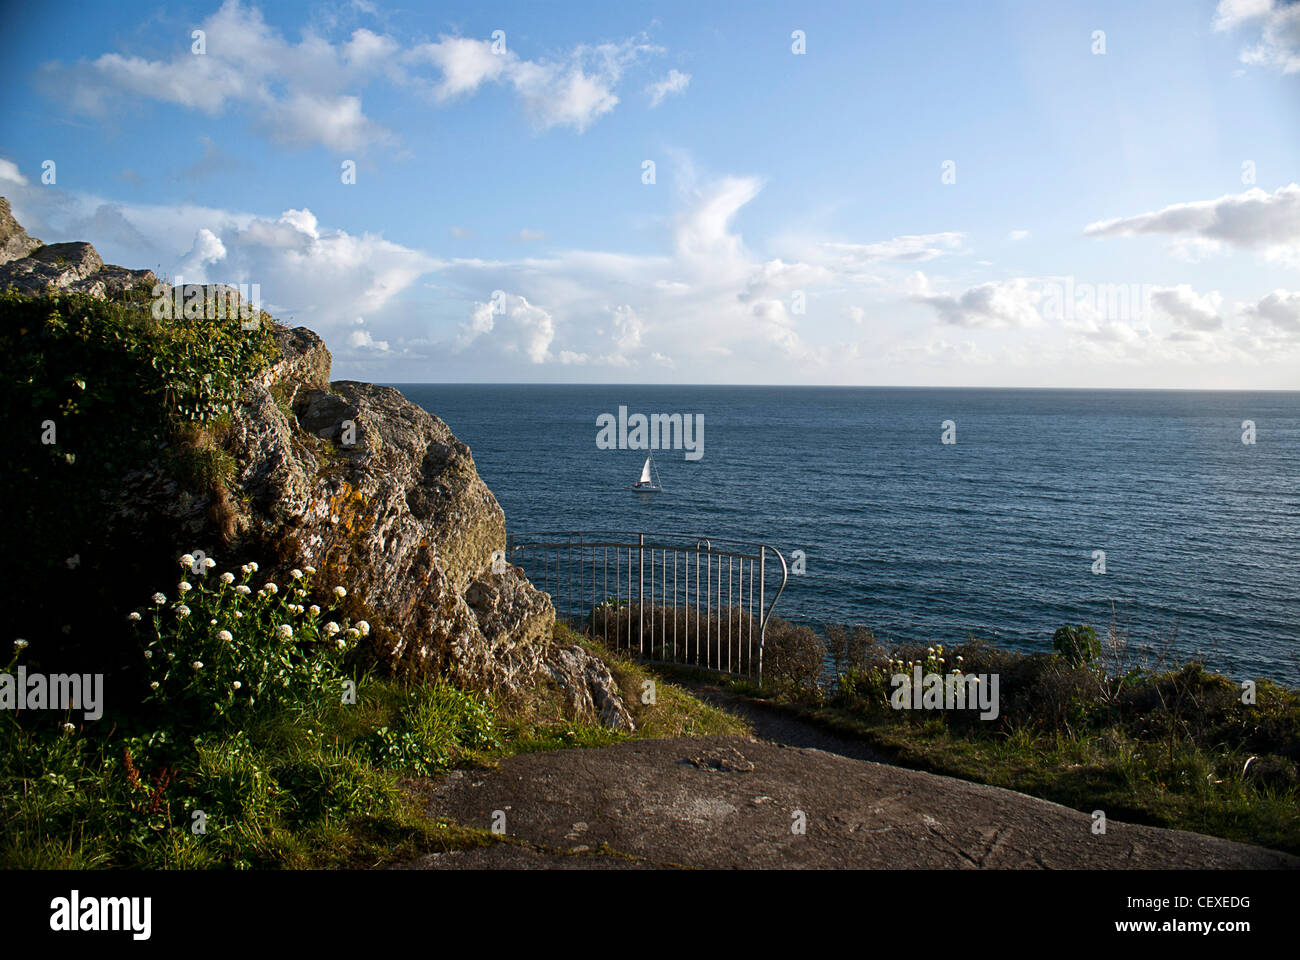 Cornwall in a picture. Stock Photo